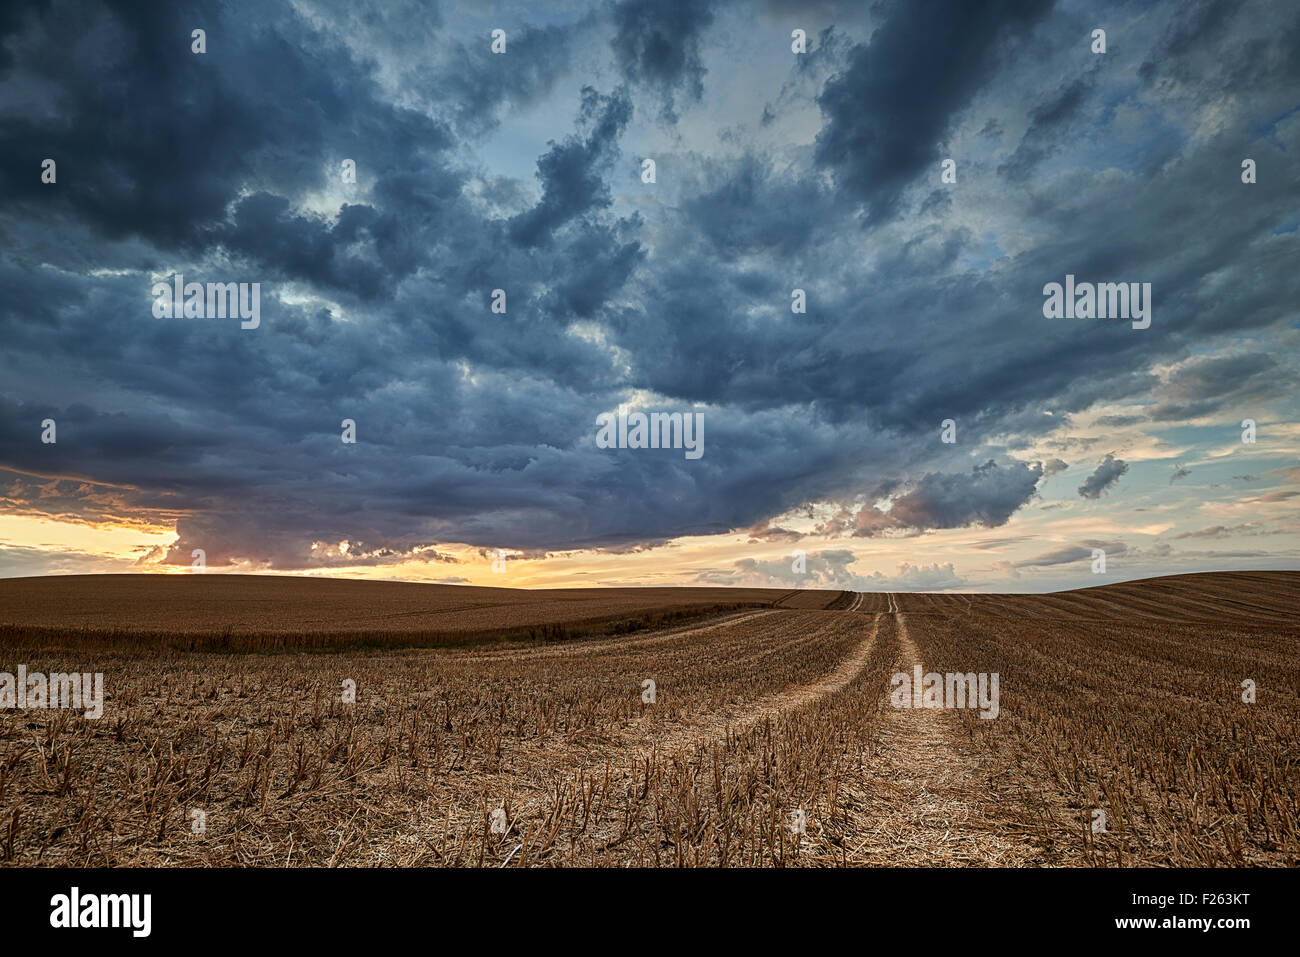 Storm Clouds Gather Over A Field Of Stubble Stock Photo